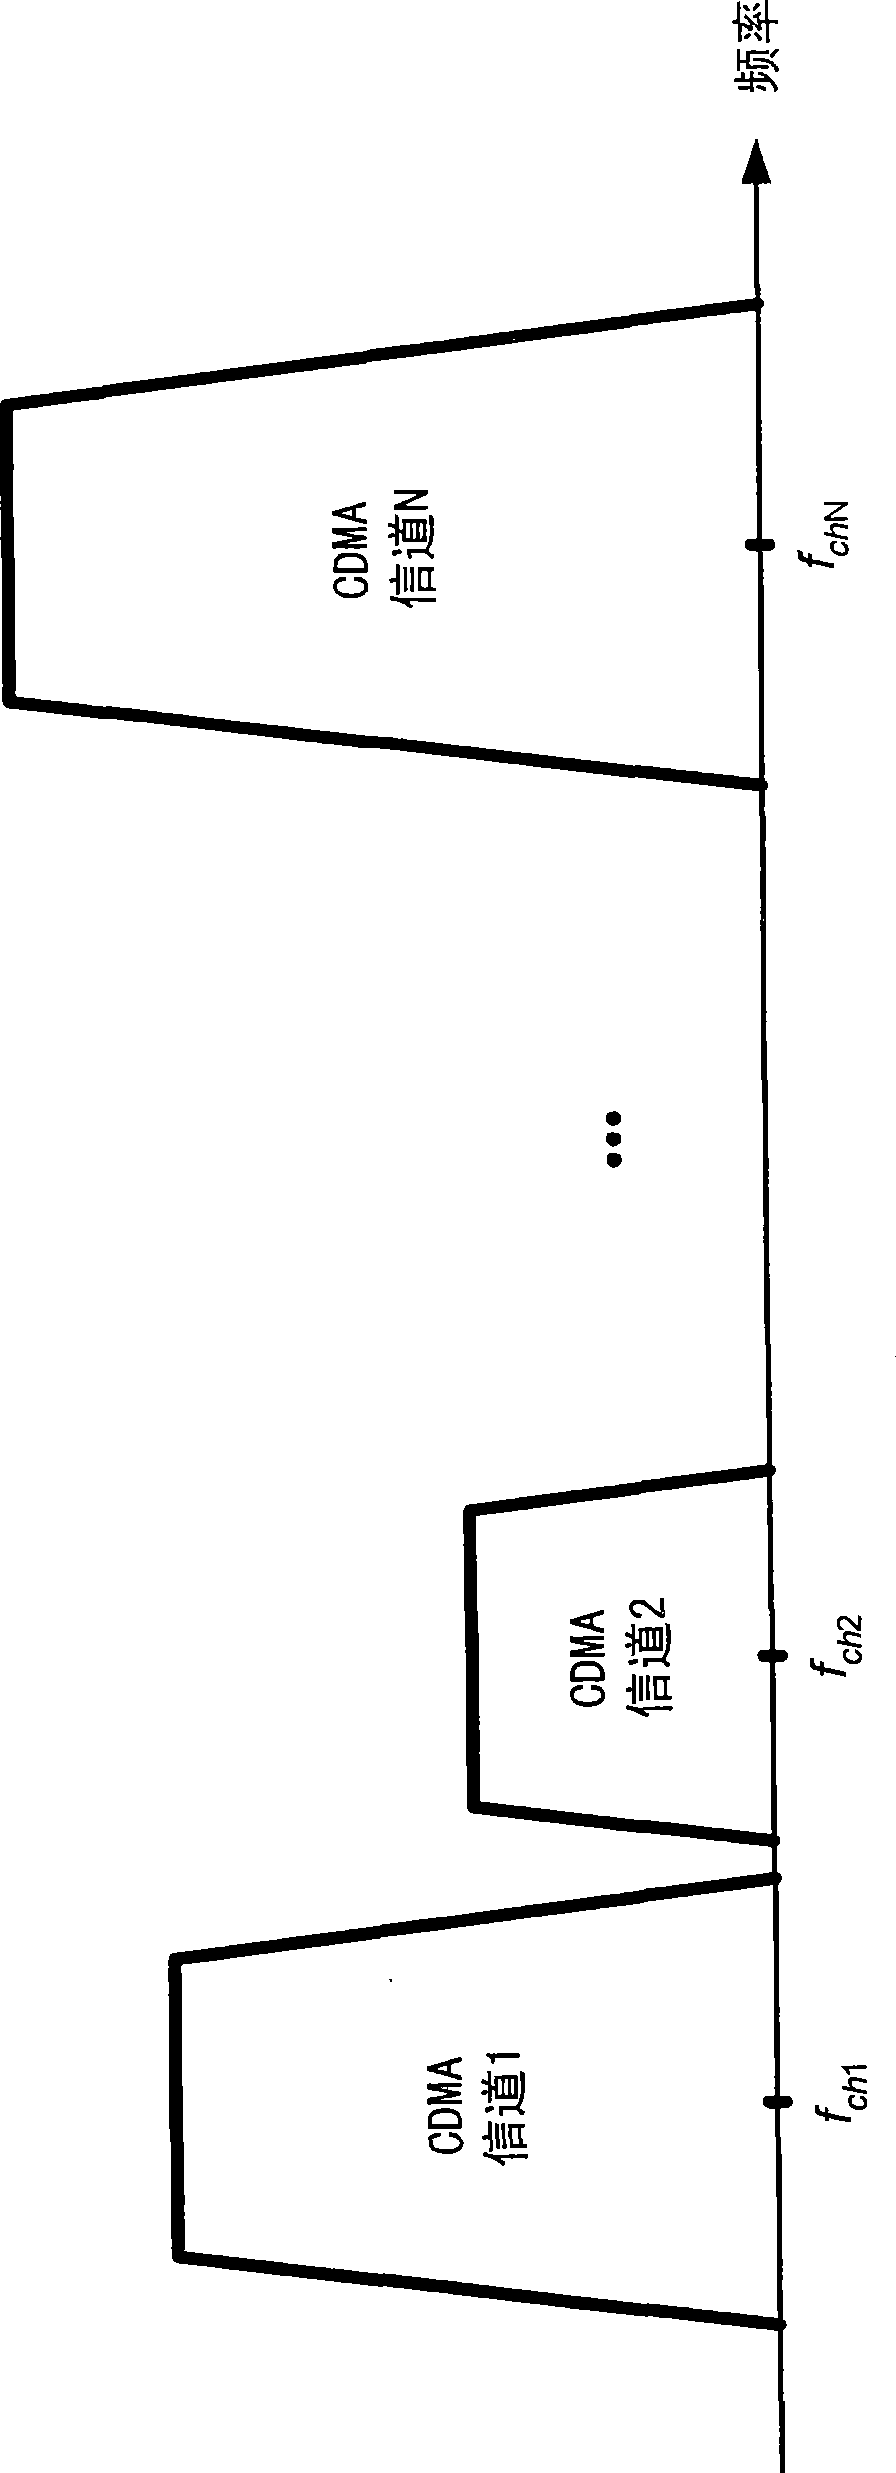 Apparatus for transmitting multiple CDMA channels